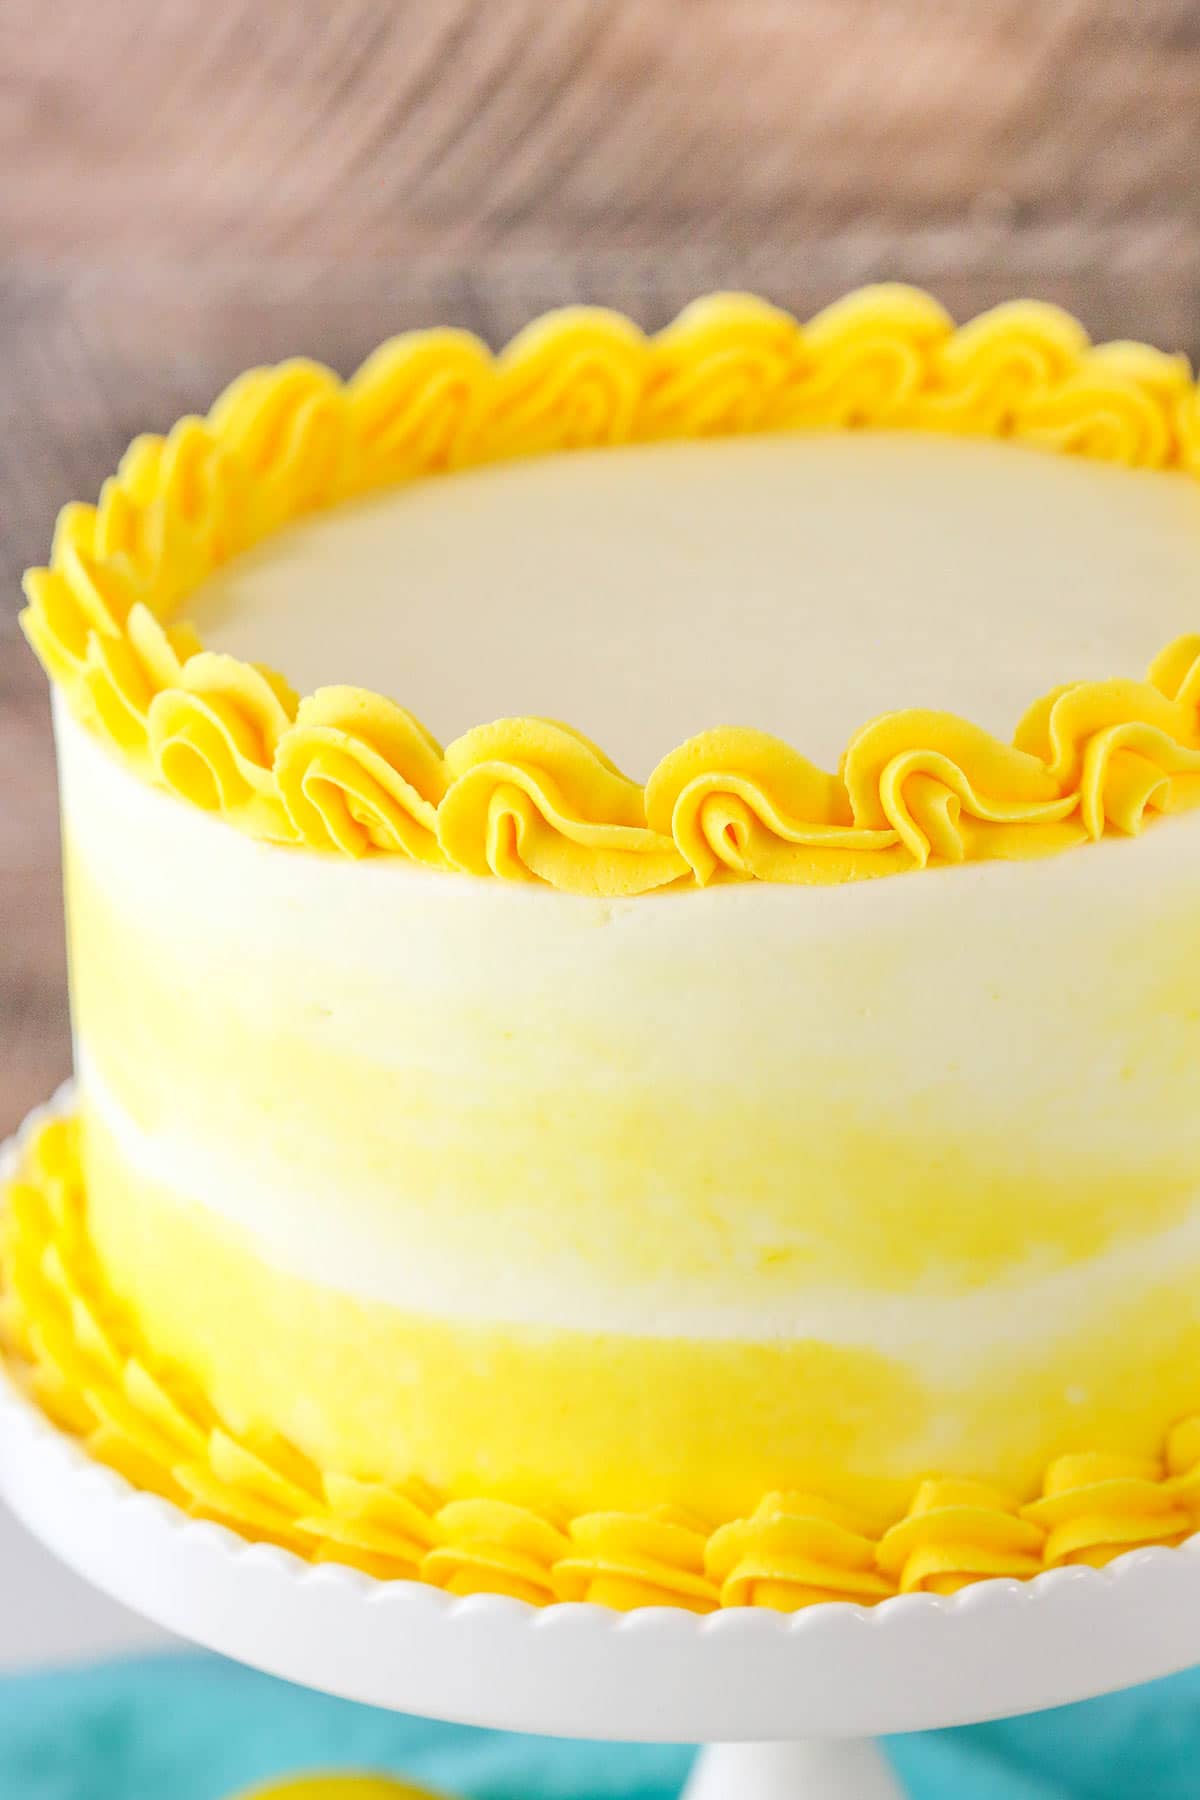 A Frosted and Decorated Citrus Cake with Yellow and White Frosting on a Cake Stand